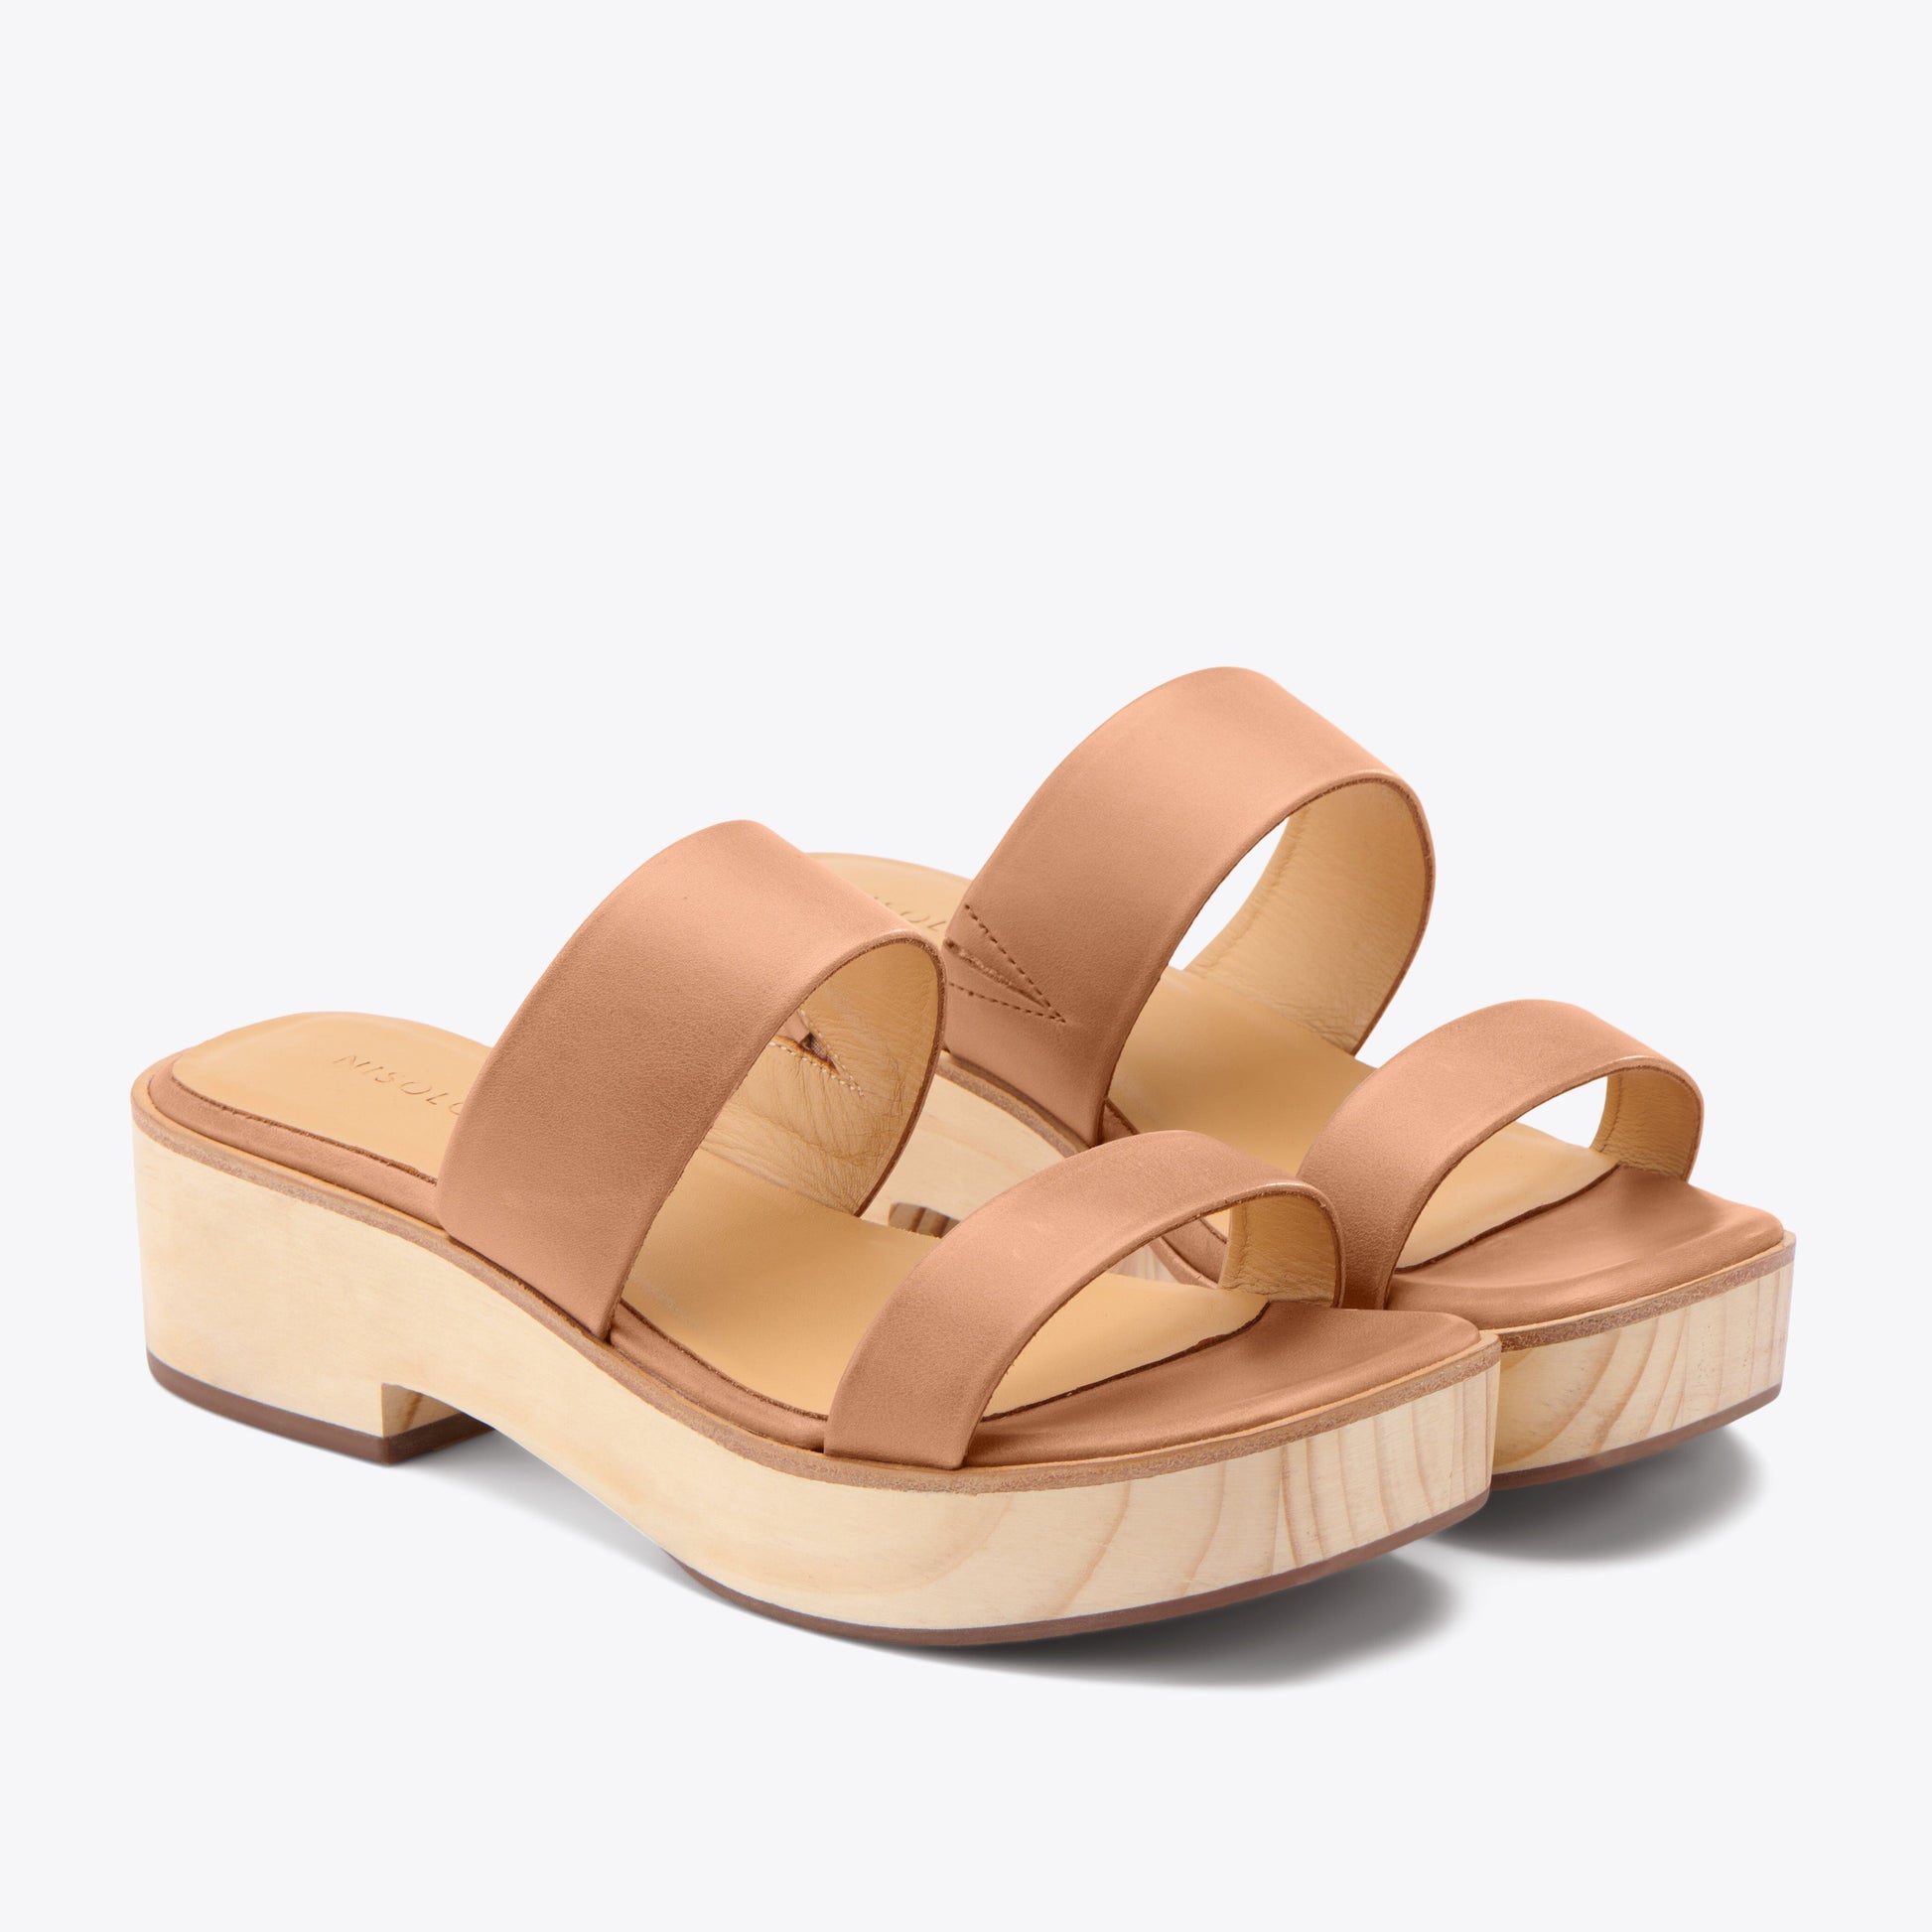 Nisolo Ellie All Day Clog Sandal -  Proof that minimal doesn’t have to mean boring. She’s casual yet sophisticated, and comfortable enough to go anywhere life takes you. These slip on leather clogs have lighweight with wooden soles & elastic for an adaptable fit.